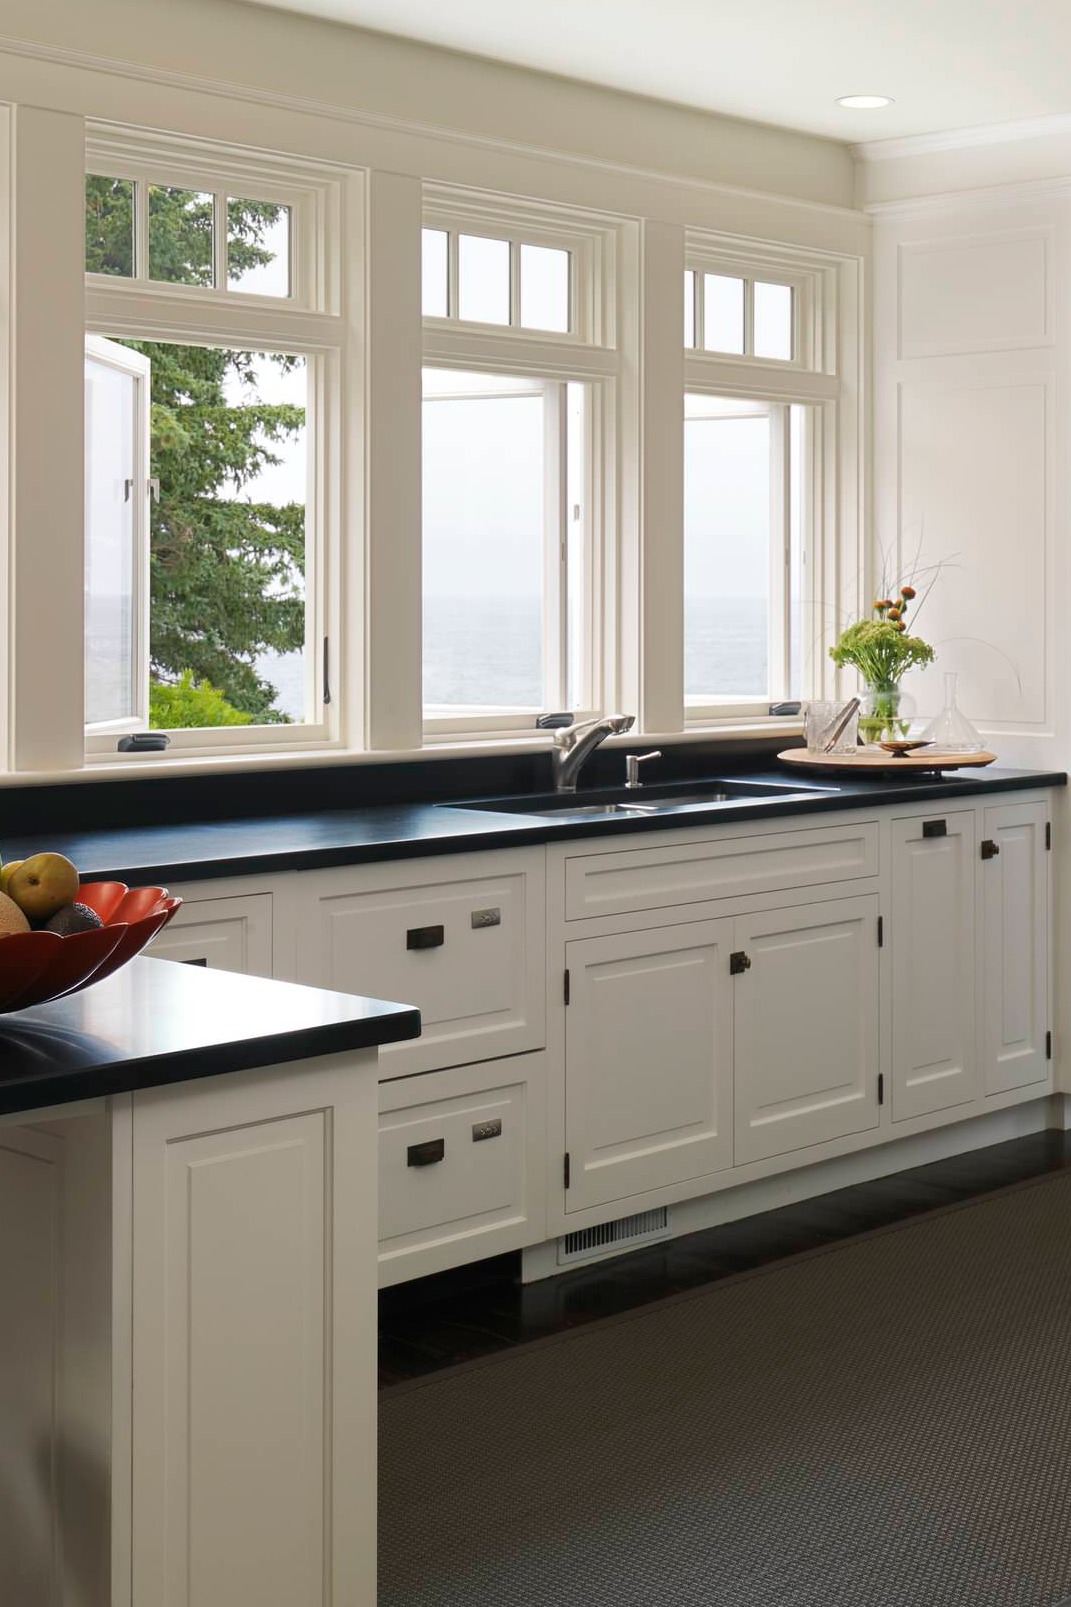 Dark Stained Wood Floor White Cabinets Honed Black Granite Counters 1